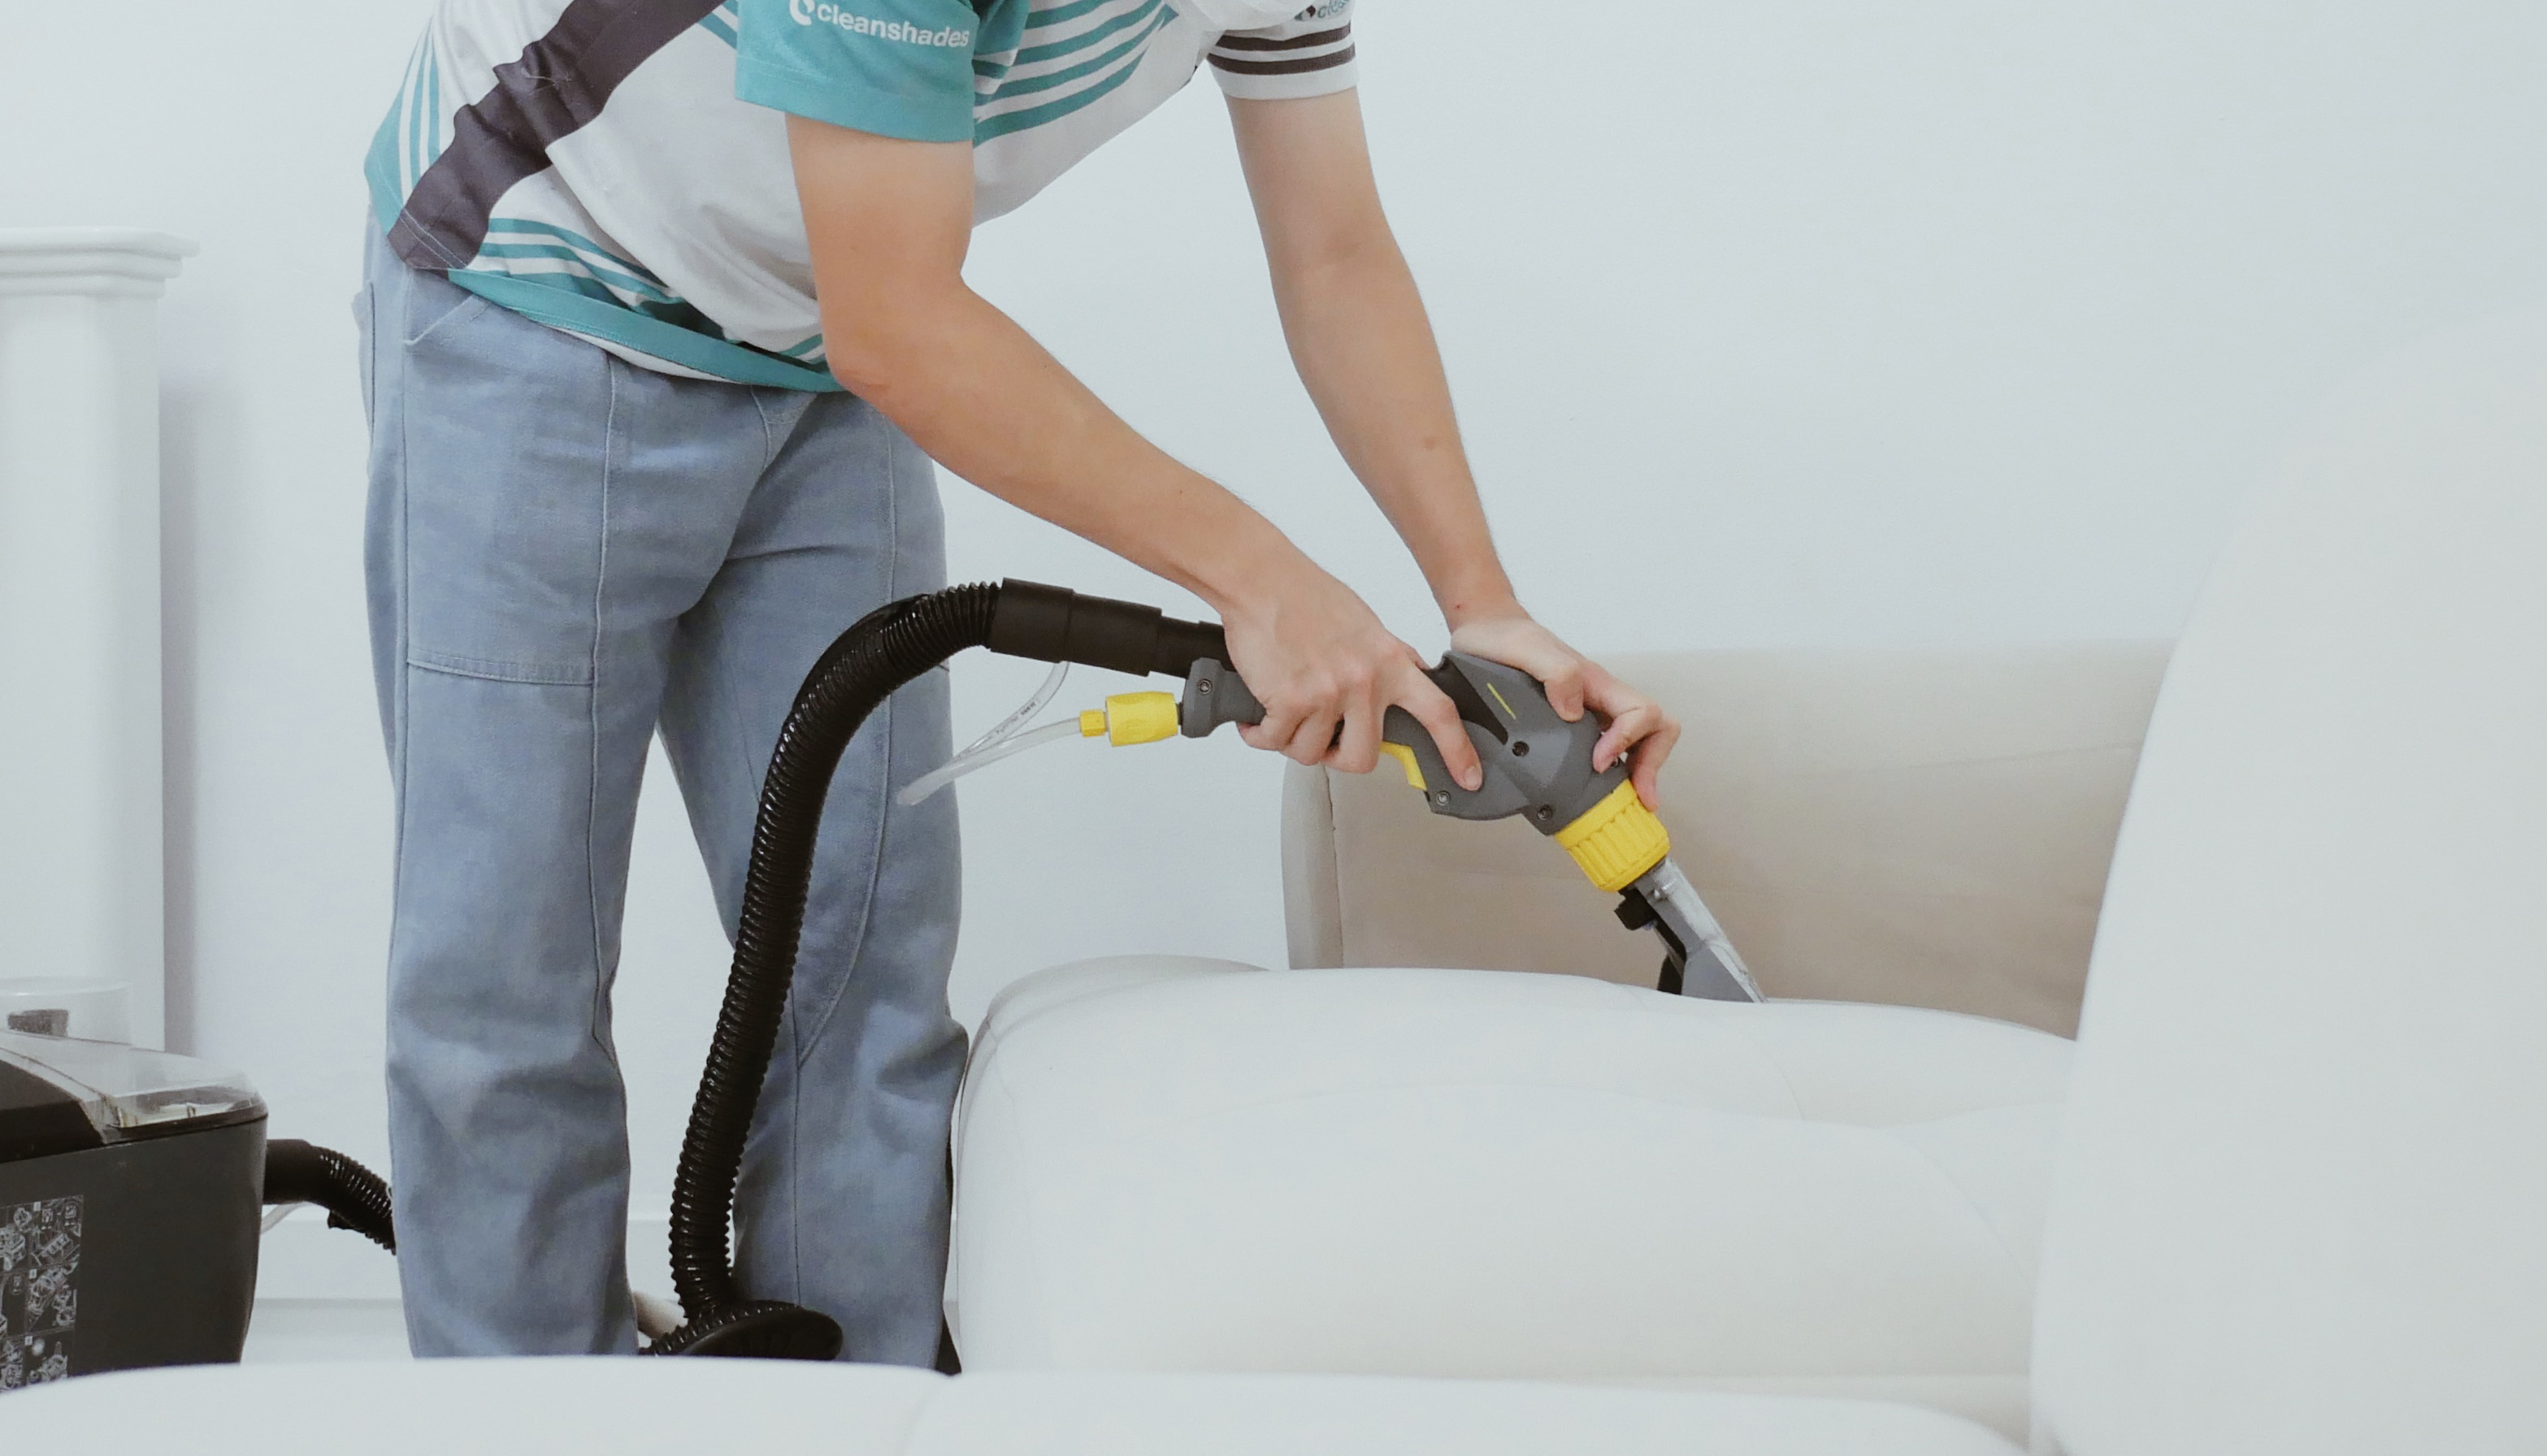 sofa cleaning services singapore - cleanshades